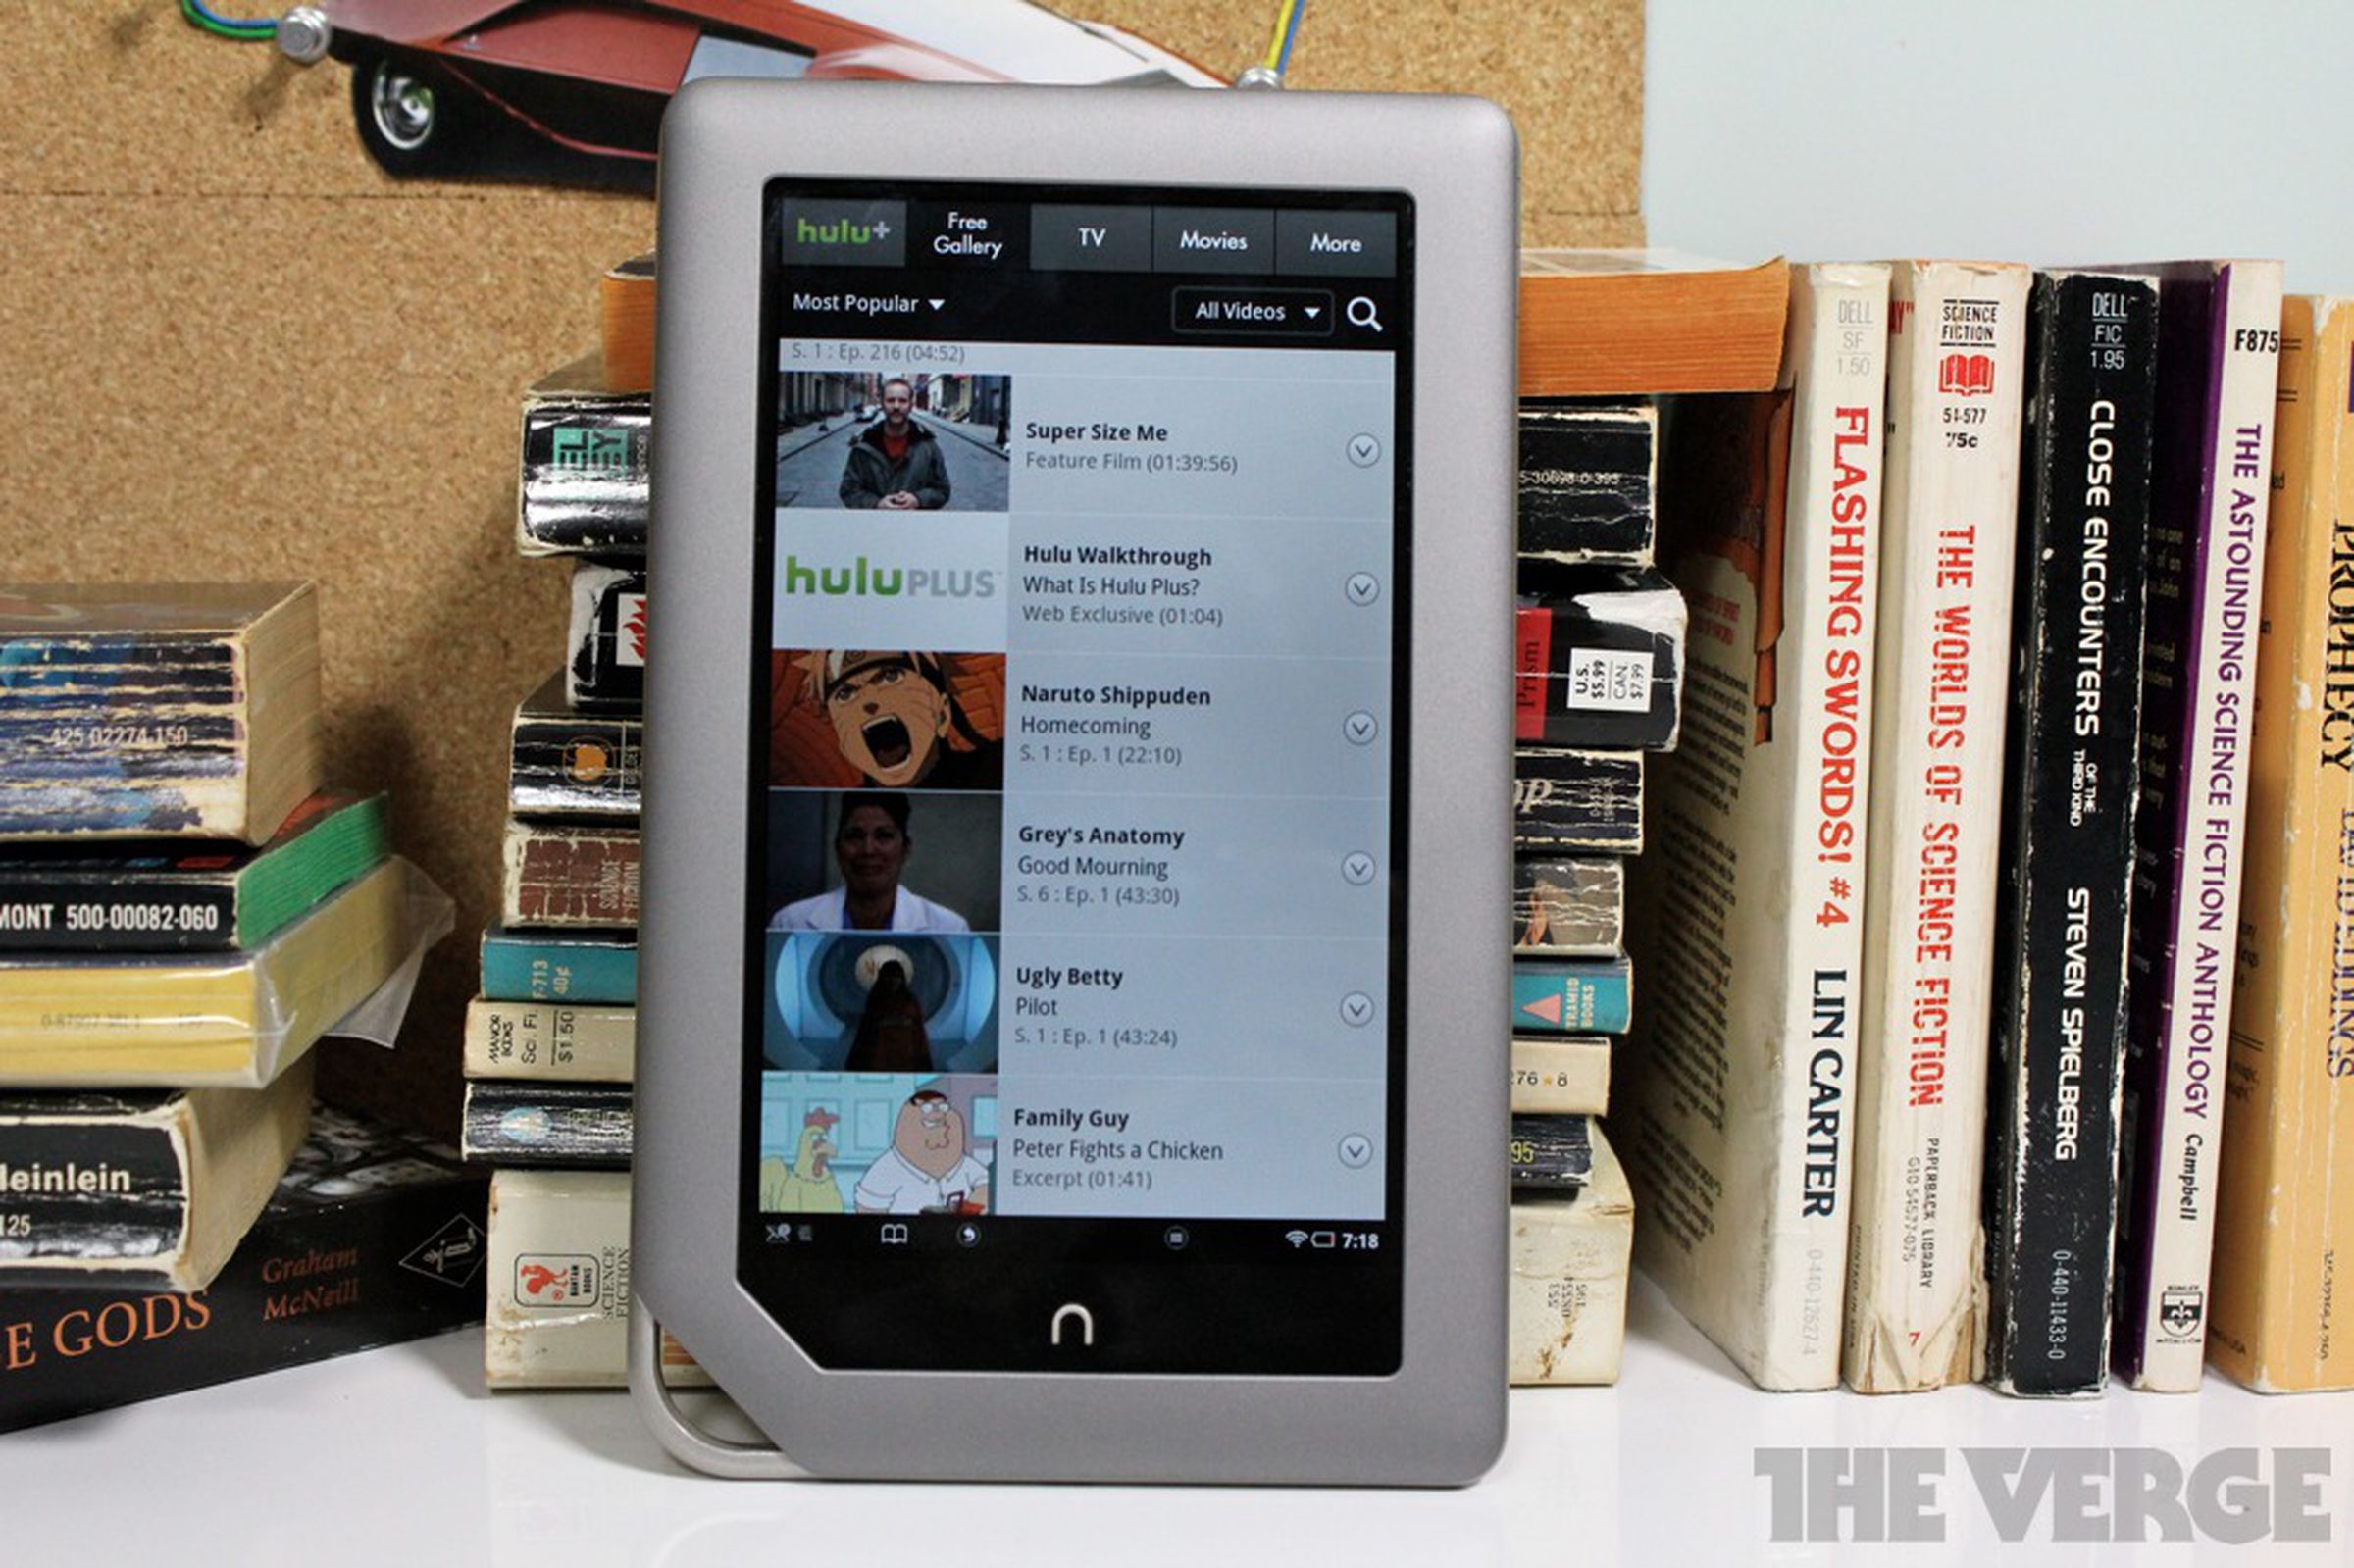 Nook Tablet review photos 